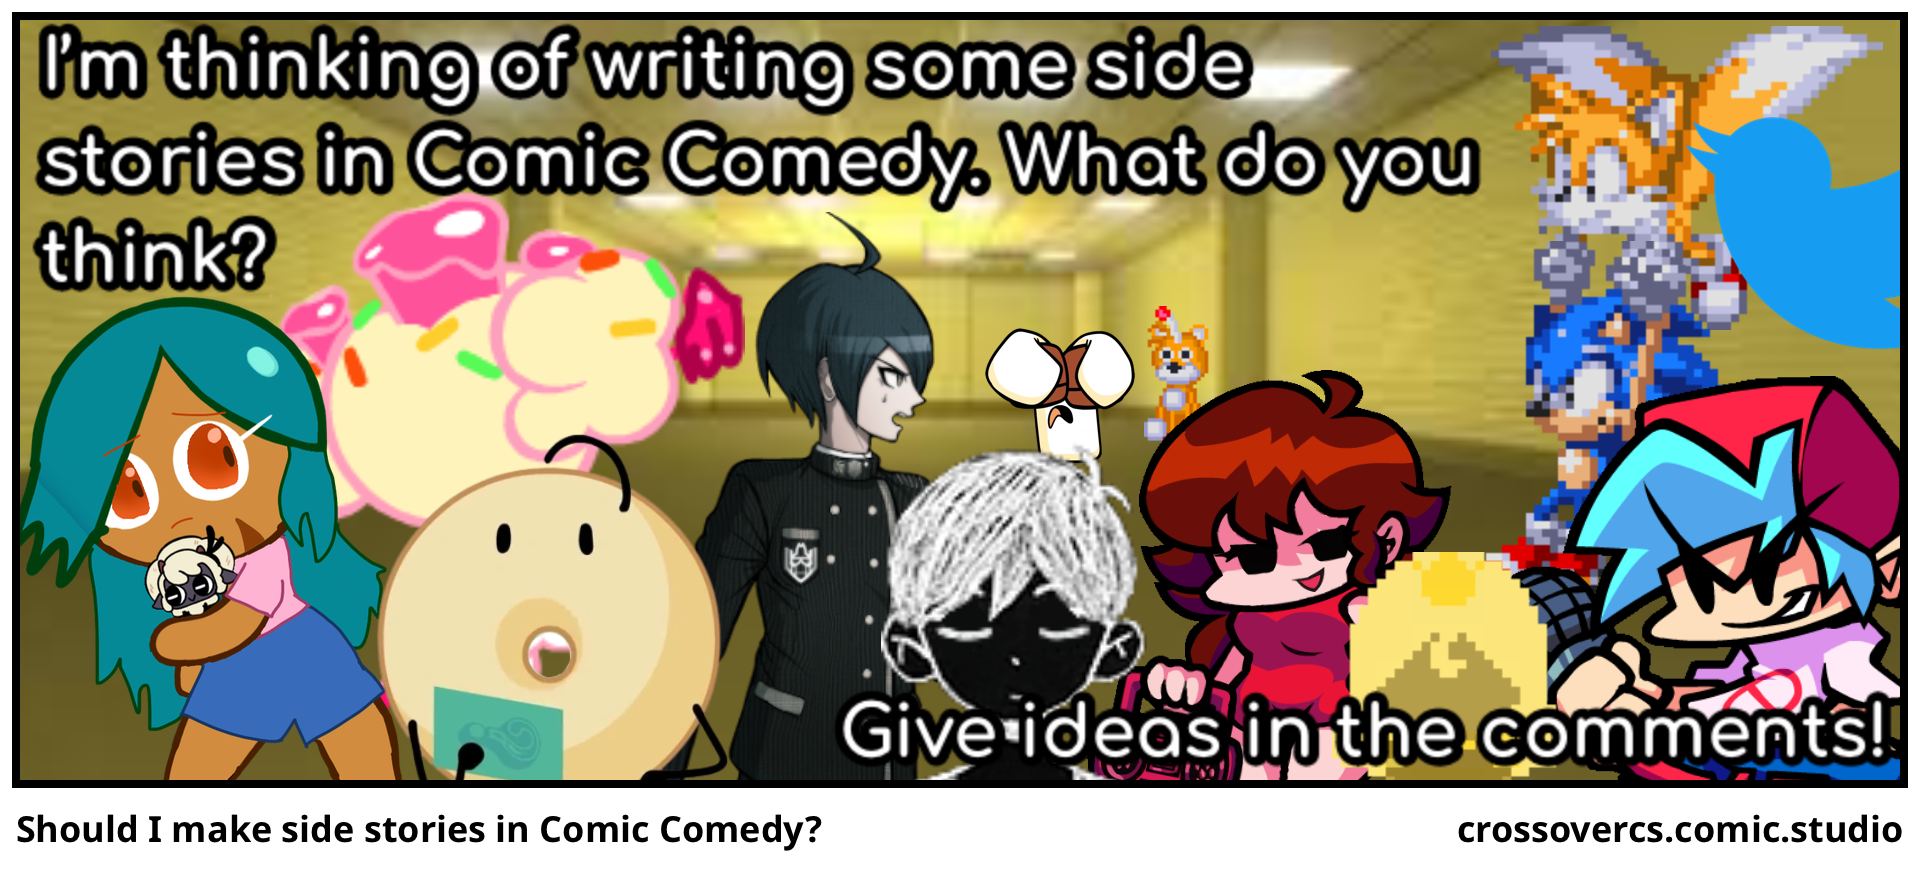 Should I make side stories in Comic Comedy?